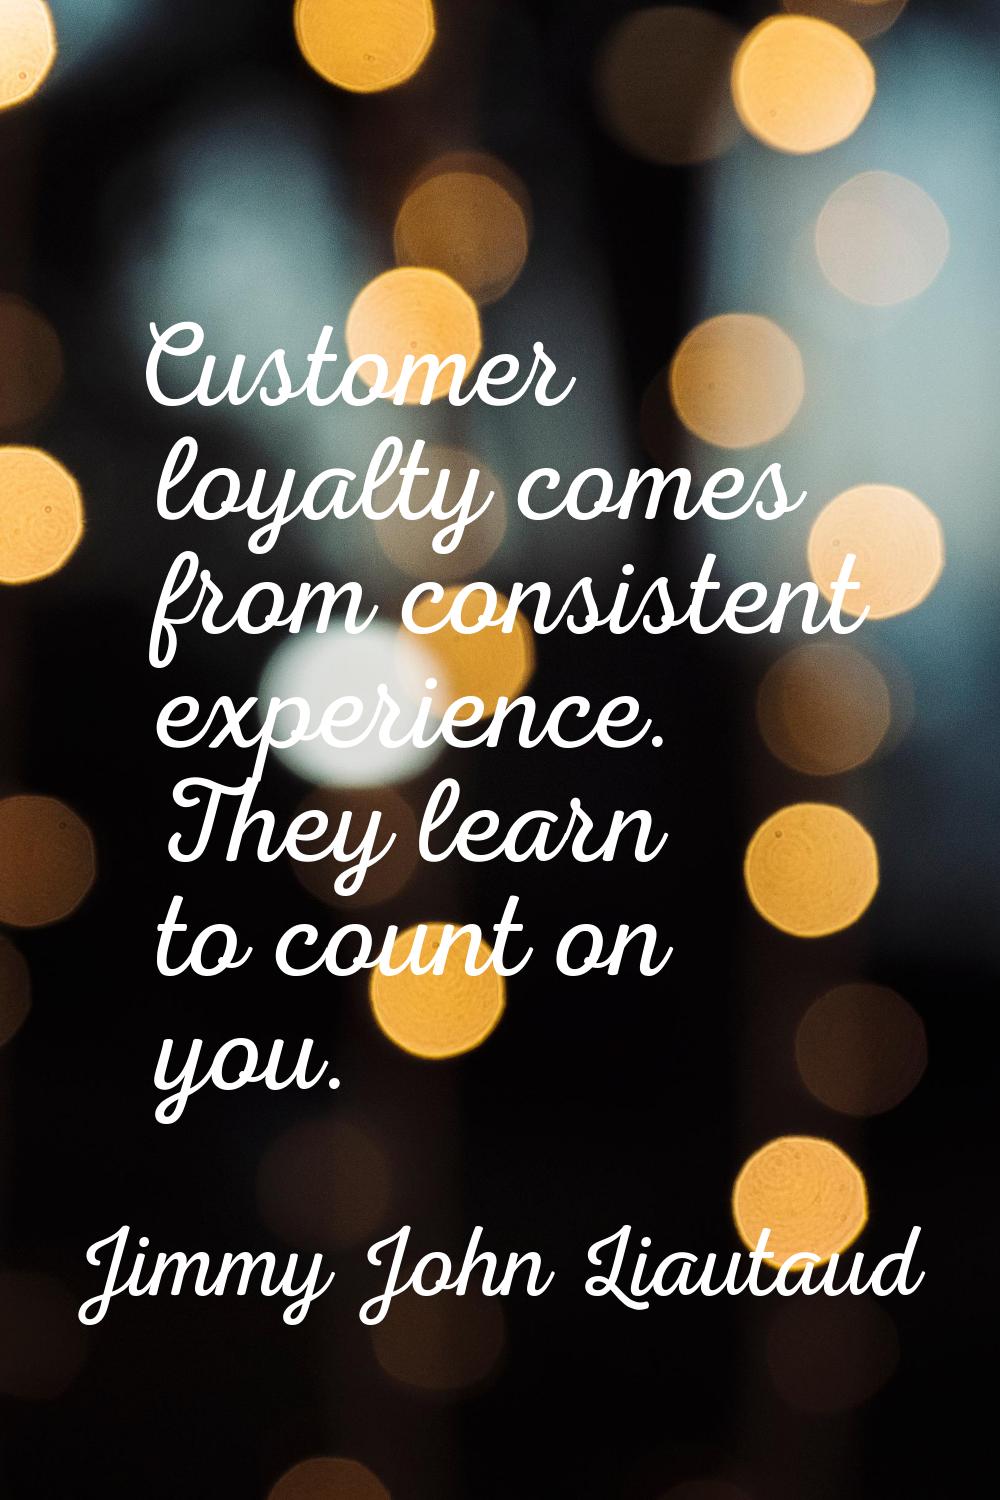 Customer loyalty comes from consistent experience. They learn to count on you.